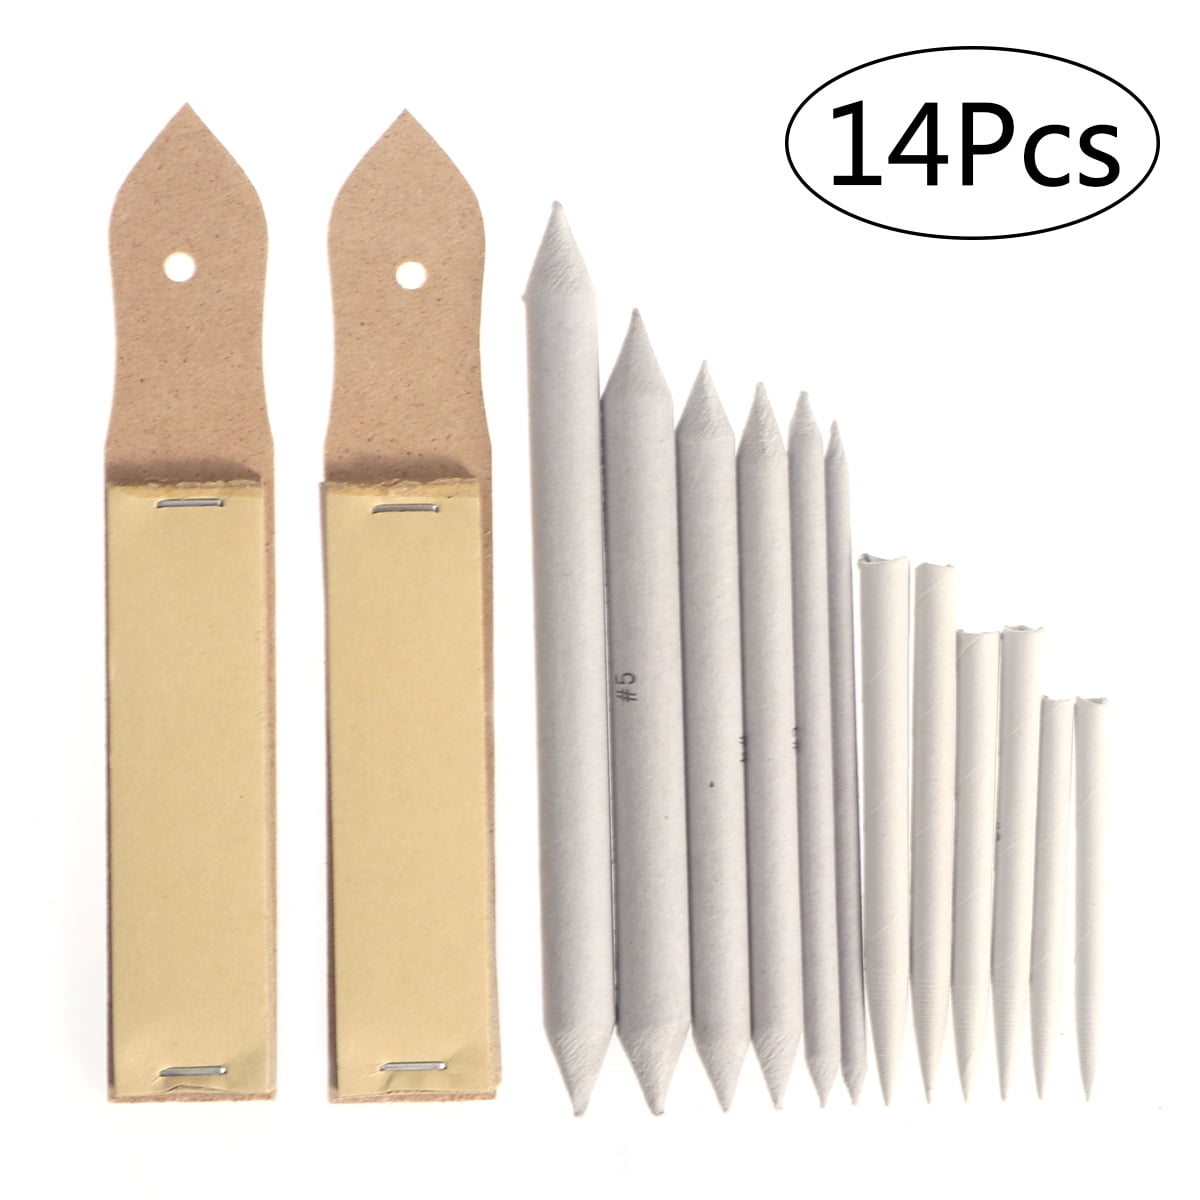 Deror Pencil Blending Stumps and Tortillions Set Drawing Tools with 2Pcs Sandpaper Pencil Pointer for Sketch